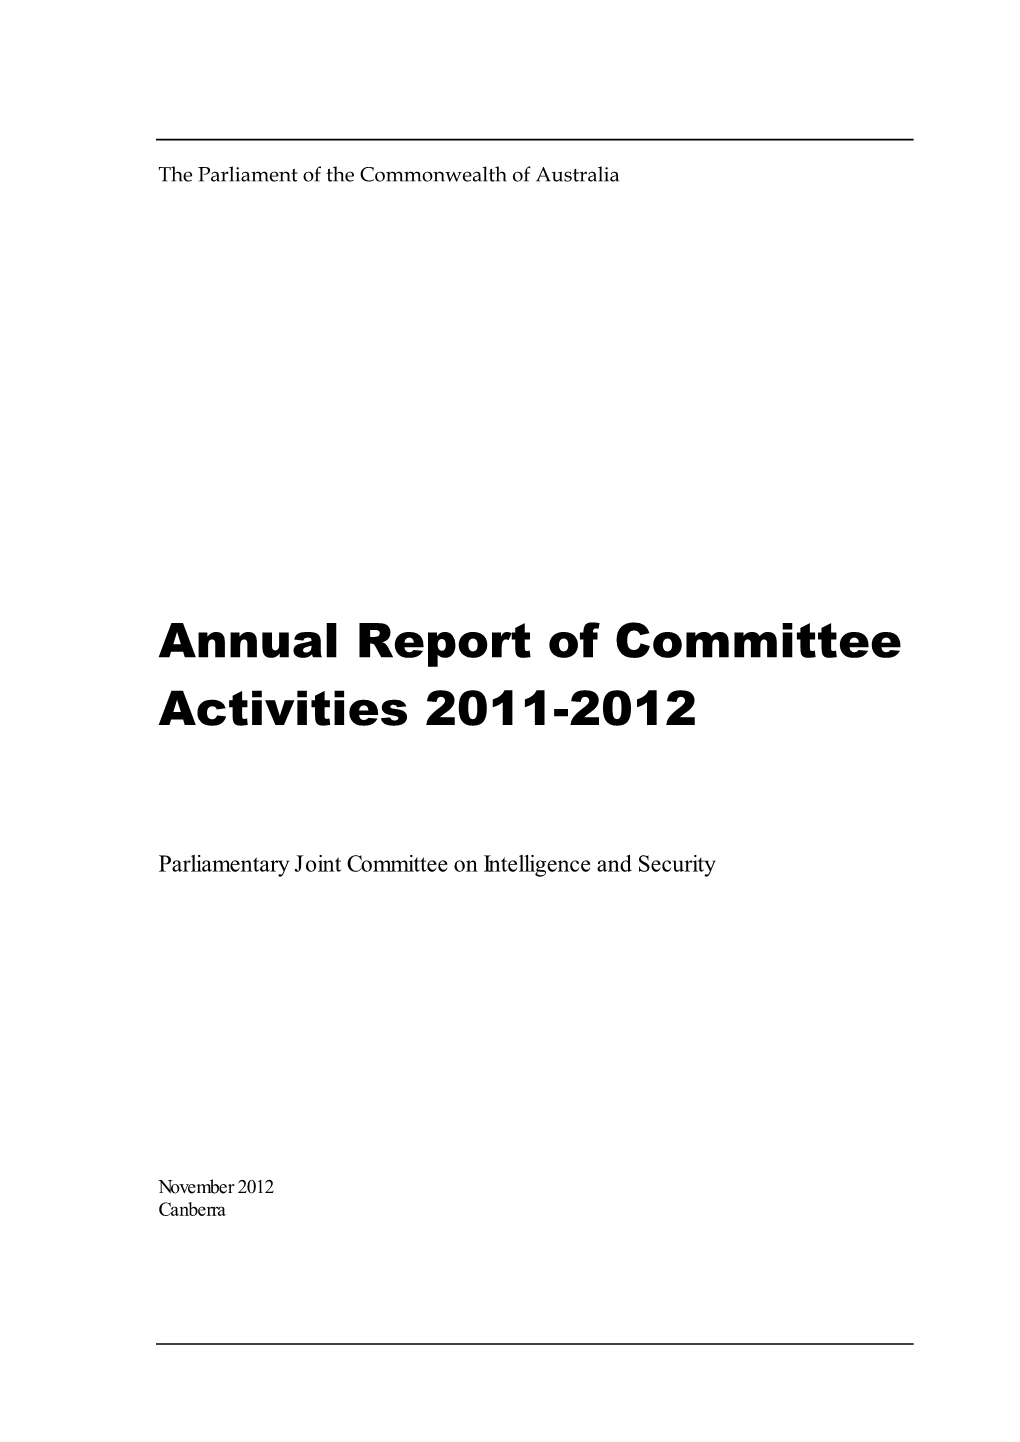 Annual Report of Committee Activities 2011-2012